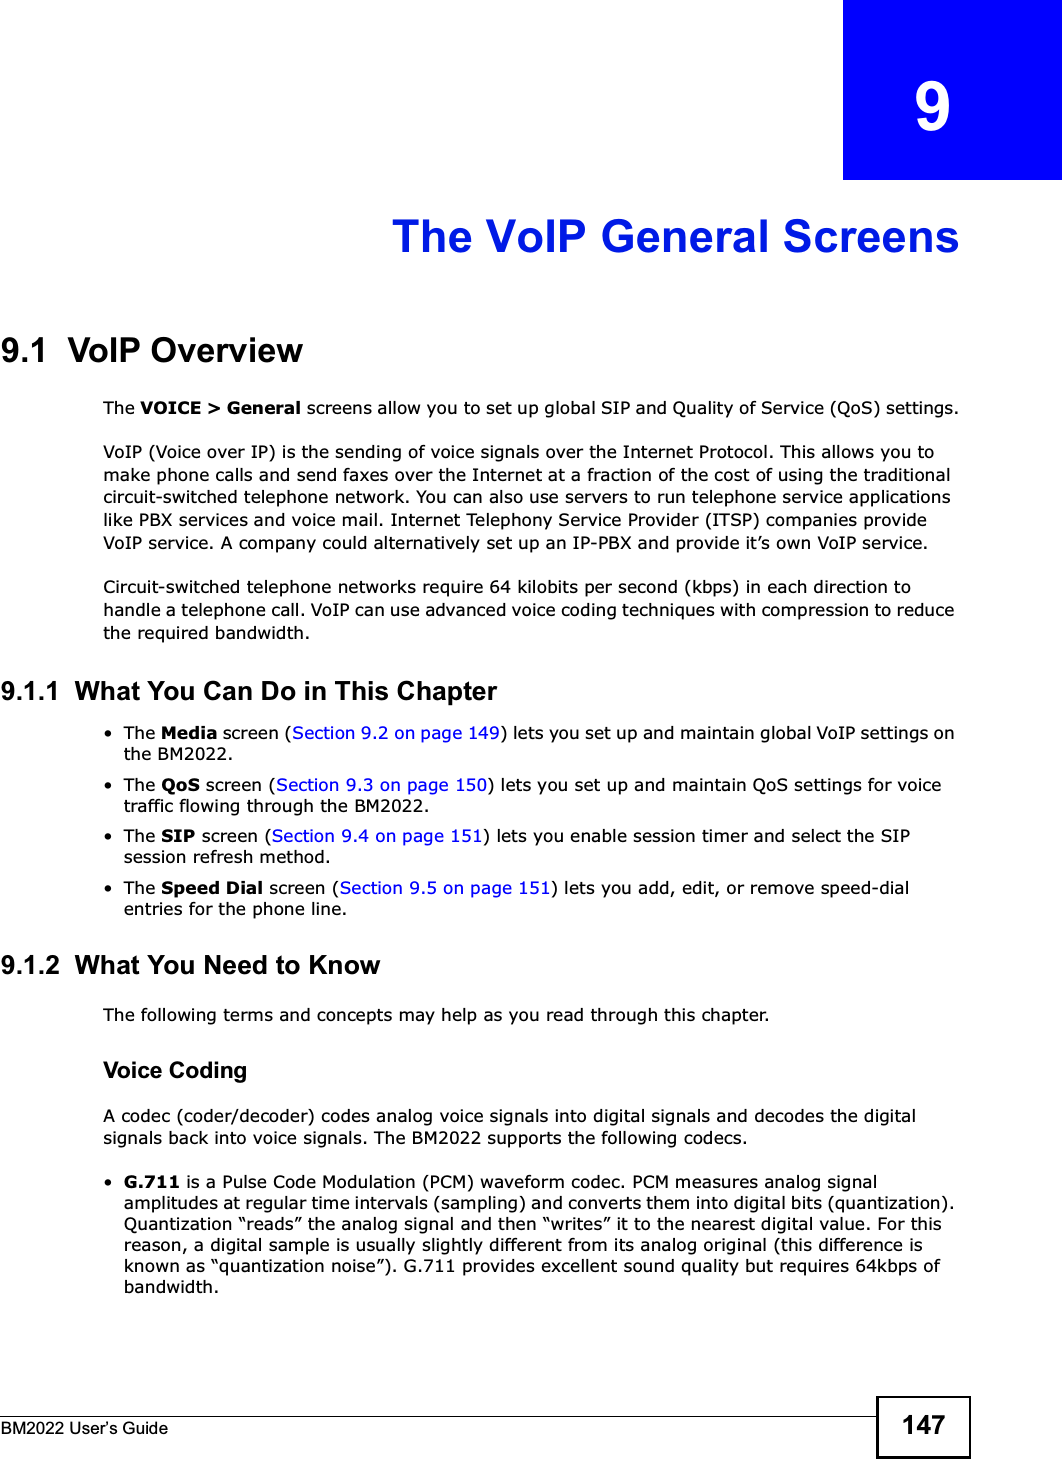 BM2022 Users Guide 147CHAPTER   9The VoIP General Screens9.1  VoIP OverviewThe VOICE &gt; General screens allow you to set up global SIP and Quality of Service (QoS) settings.VoIP (Voice over IP) is the sending of voice signals over the Internet Protocol. This allows you to make phone calls and send faxes over the Internet at a fraction of the cost of using the traditional circuit-switched telephone network. You can also use servers to run telephone service applications like PBX services and voice mail. Internet Telephony Service Provider (ITSP) companies provide VoIP service. A company could alternatively set up an IP-PBX and provide its own VoIP service.Circuit-switched telephone networks require 64 kilobits per second (kbps) in each direction to handle a telephone call. VoIP can use advanced voice coding techniques with compression to reduce the required bandwidth.9.1.1  What You Can Do in This ChapterThe Media screen (Section 9.2 on page 149) lets you set up and maintain global VoIP settings on the BM2022.The QoS screen (Section 9.3 on page 150) lets you set up and maintain QoS settings for voice traffic flowing through the BM2022.The SIP screen (Section 9.4 on page 151) lets you enable session timer and select the SIP session refresh method.The Speed Dial screen (Section 9.5 on page 151) lets you add, edit, or remove speed-dial entries for the phone line.9.1.2  What You Need to KnowThe following terms and concepts may help as you read through this chapter.Voice CodingA codec (coder/decoder) codes analog voice signals into digital signals and decodes the digital signals back into voice signals. The BM2022 supports the following codecs.G.711 is a Pulse Code Modulation (PCM) waveform codec. PCM measures analog signal amplitudes at regular time intervals (sampling) and converts them into digital bits (quantization). Quantization reads the analog signal and then writes it to the nearest digital value. For this reason, a digital sample is usually slightly different from its analog original (this difference is known as quantization noise). G.711 provides excellent sound quality but requires 64kbps of bandwidth.